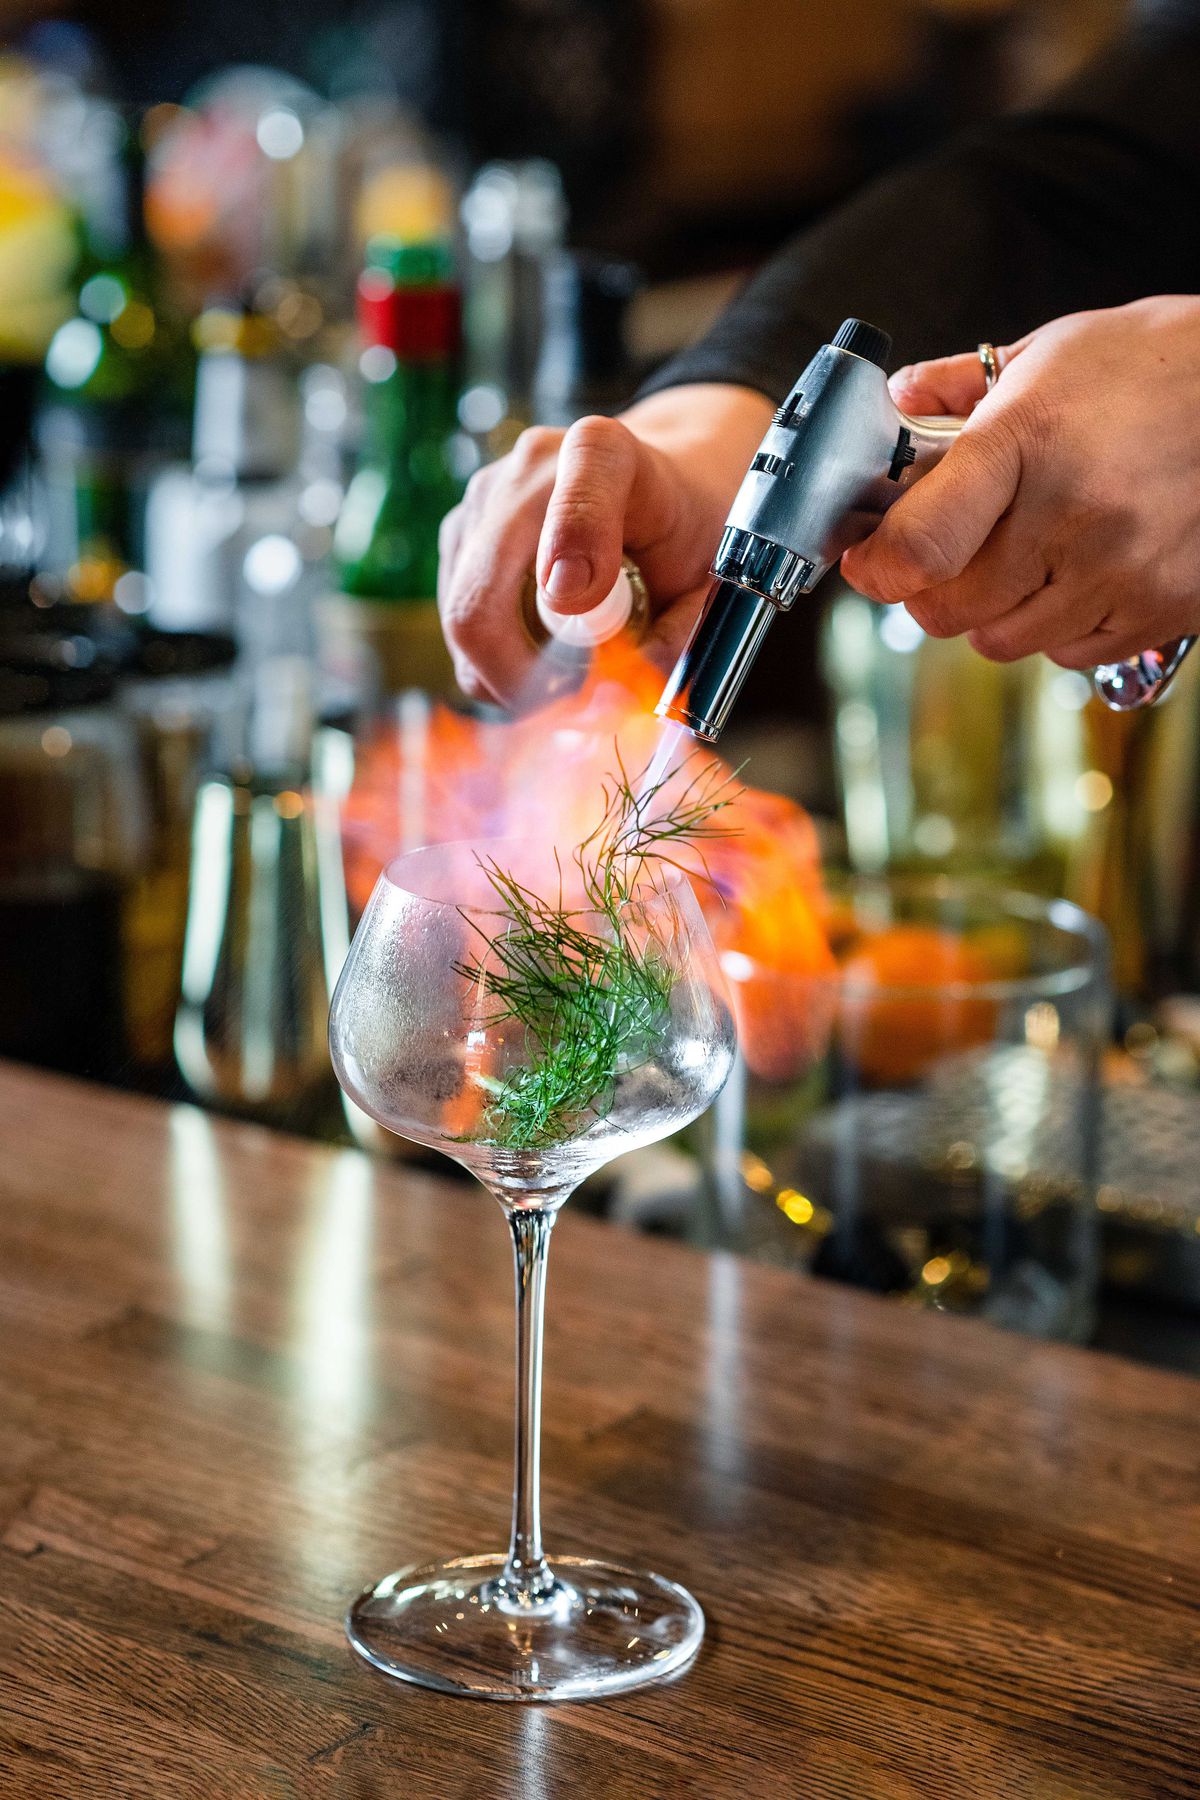 A bartender torches an anise front inside a cocktail glass while spraying it with Herbsaint.